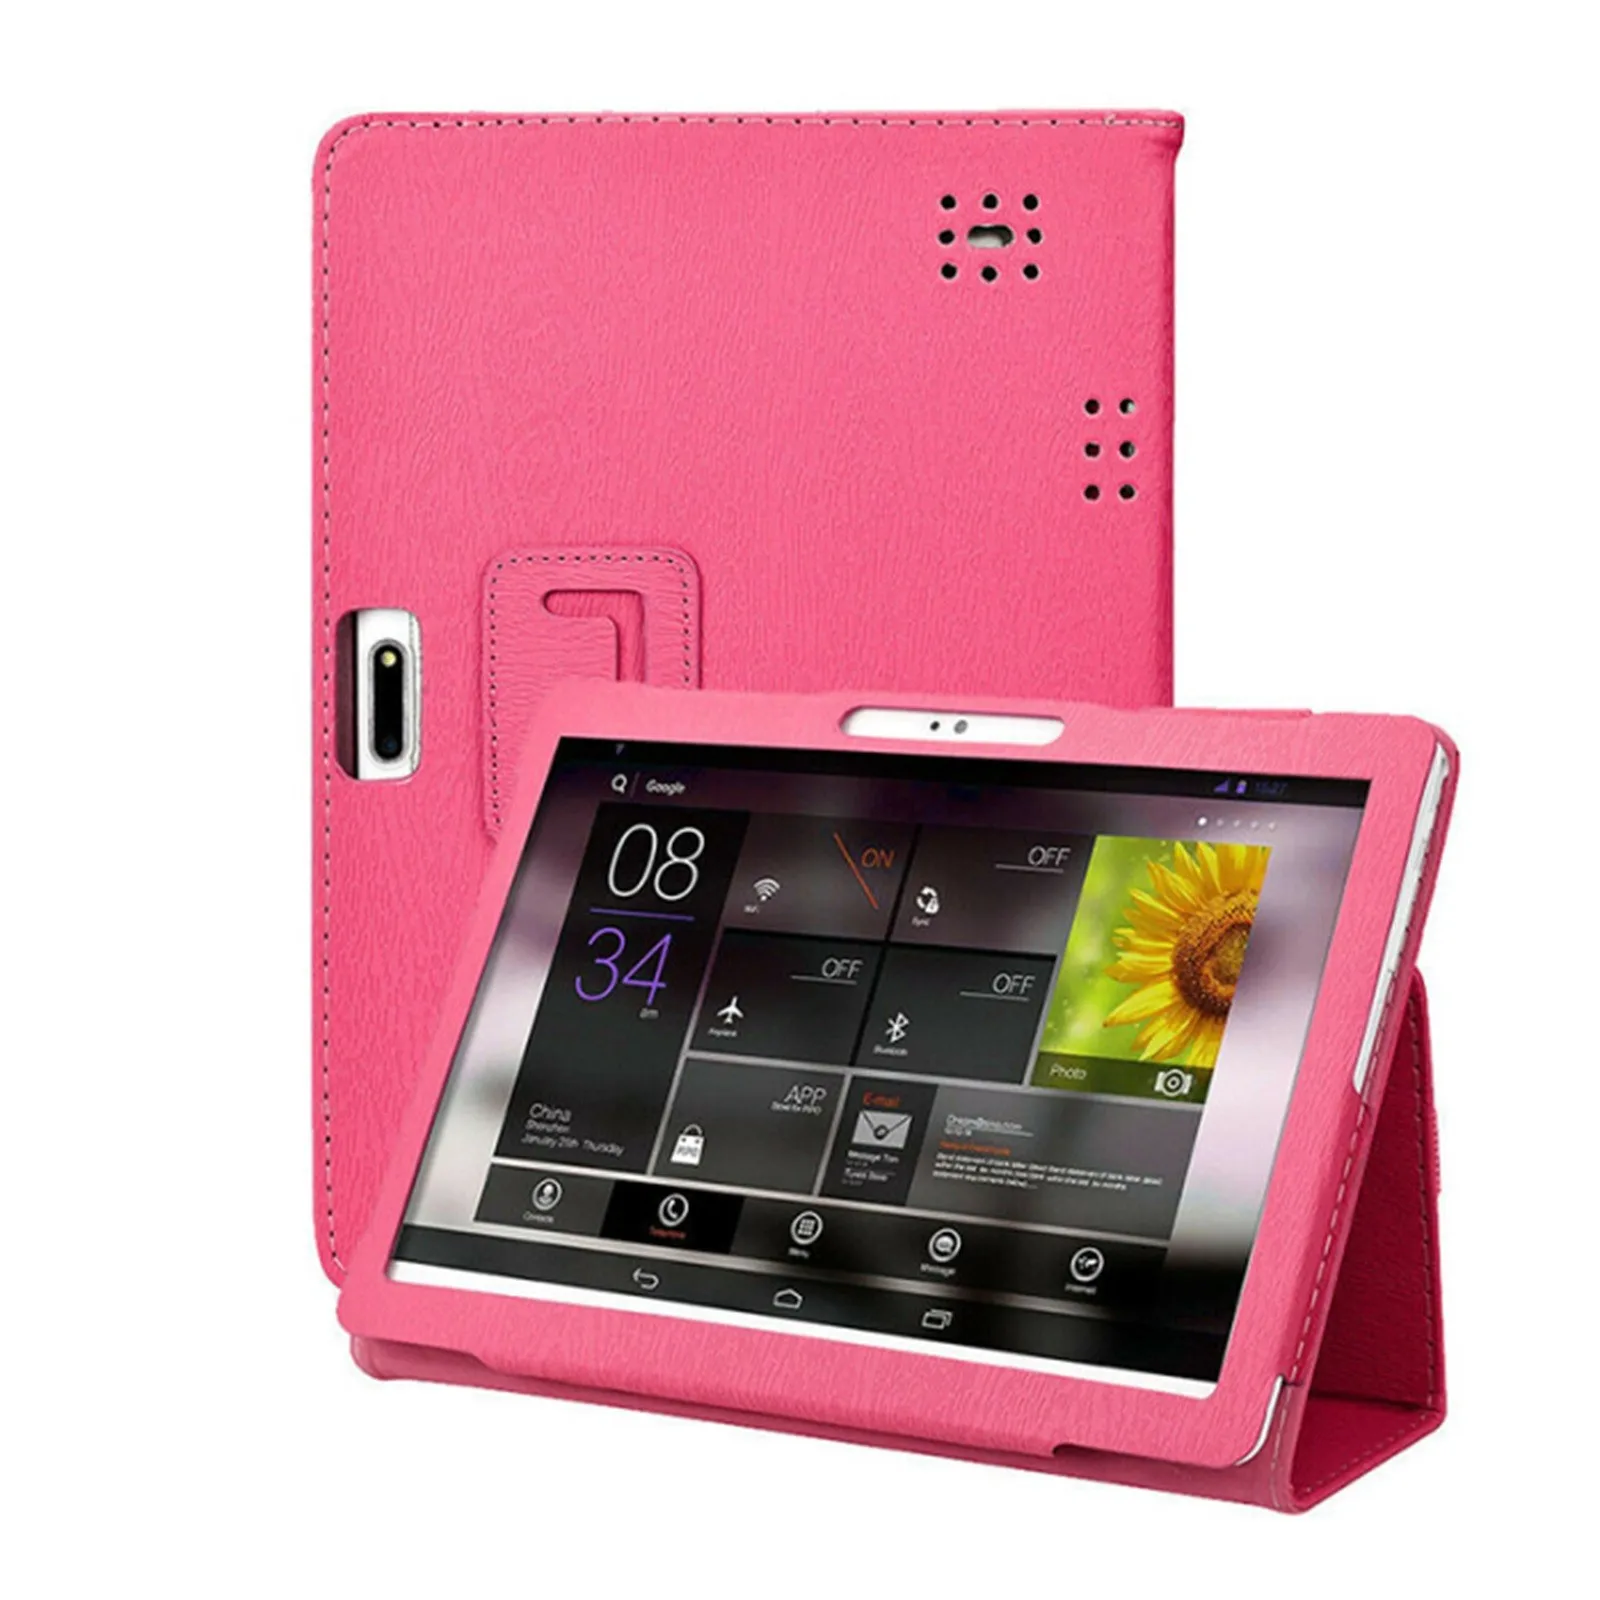 stylus pen for android tablet Universal Leather Cover Case For 10 10.1 Inch Android Tablet PC Fashion Design android tablet with keyboard Tablet Accessories